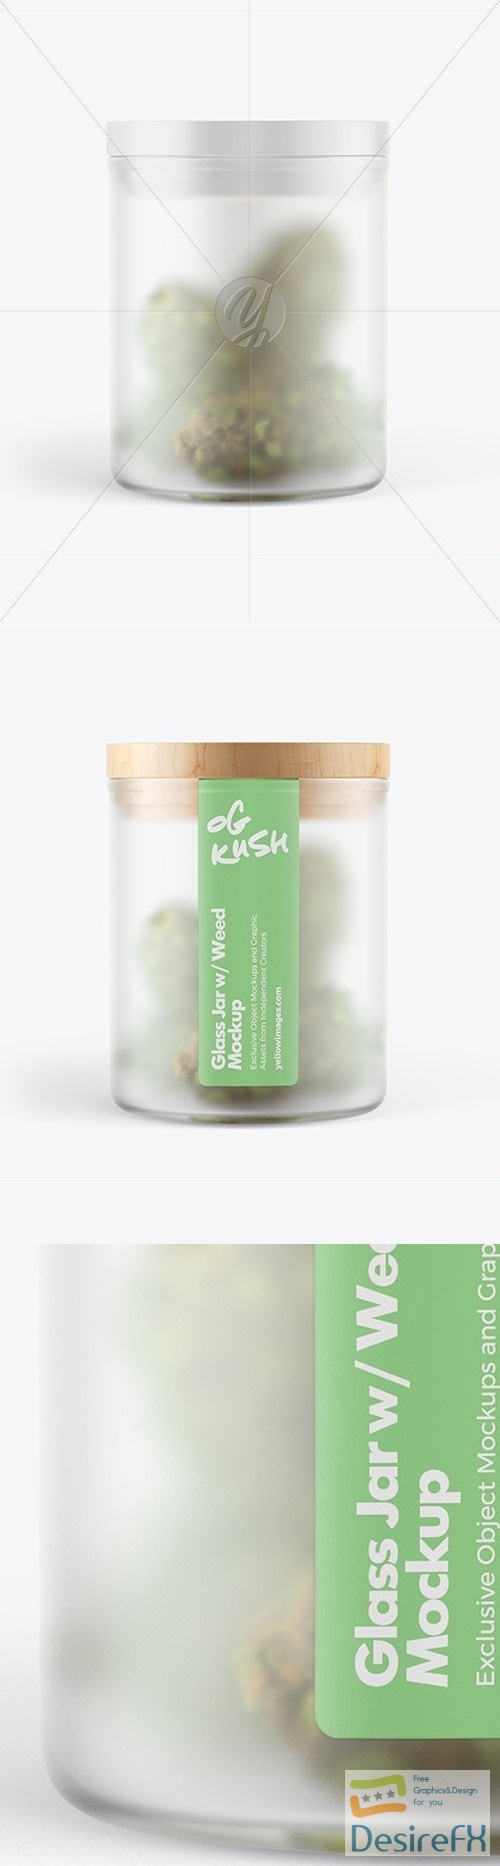 Frosted Glass Jar w/ Weed Buds Mockup 50222